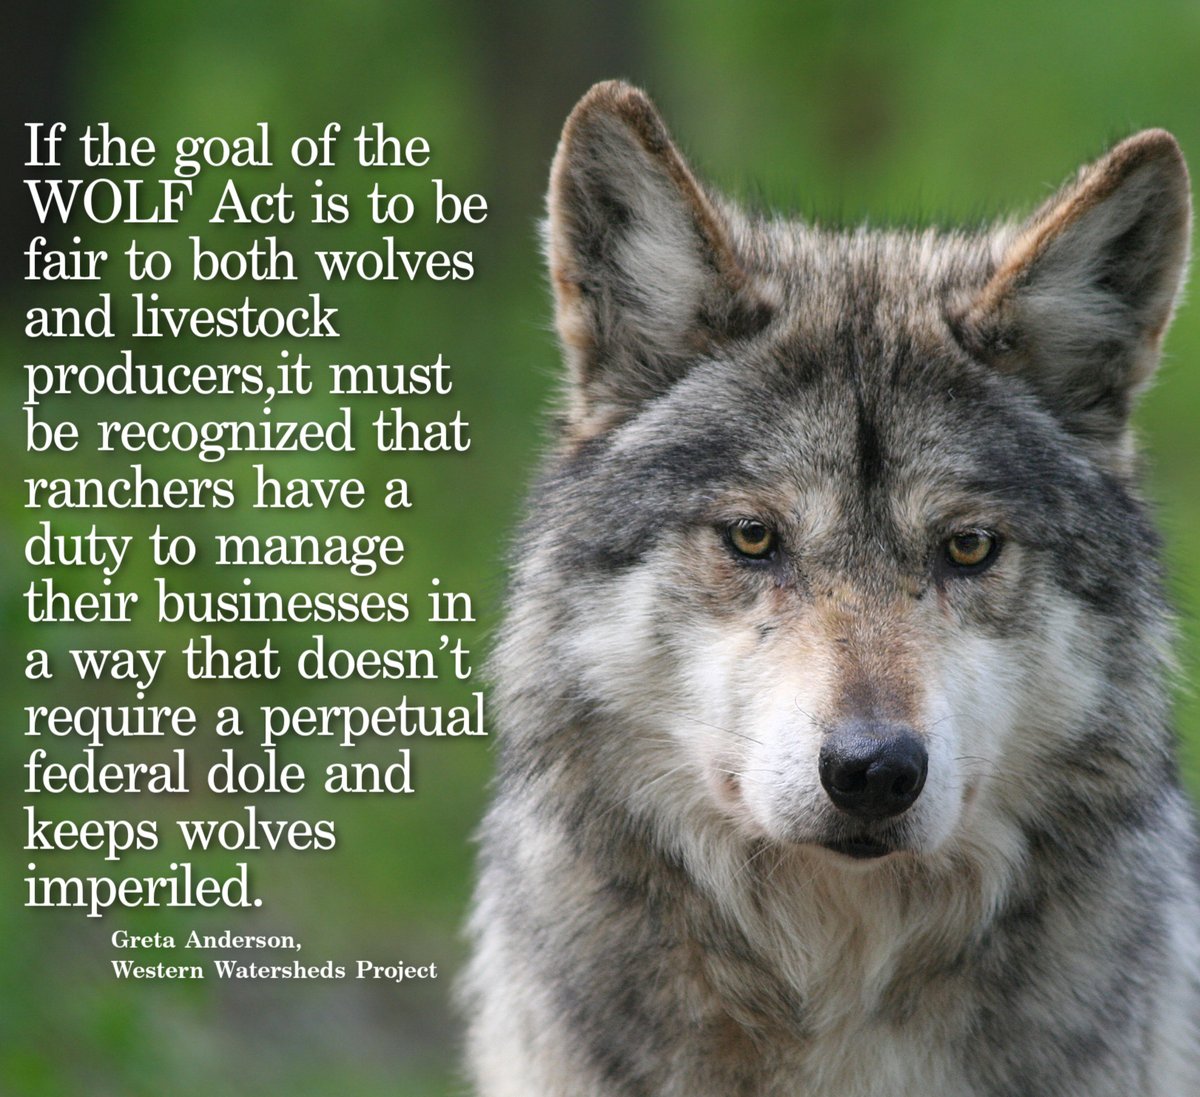 The recent bipartisan legislative effort known as the “Wolf & Livestock Fairness (WOLF) Act” is anything but fair to wolves + American taxpayers. Instead offers yet another handout to livestock operators who choose to raise cows in Mexican wolf habitat.
→ abqjournal.com/wolf-act-isn-t…